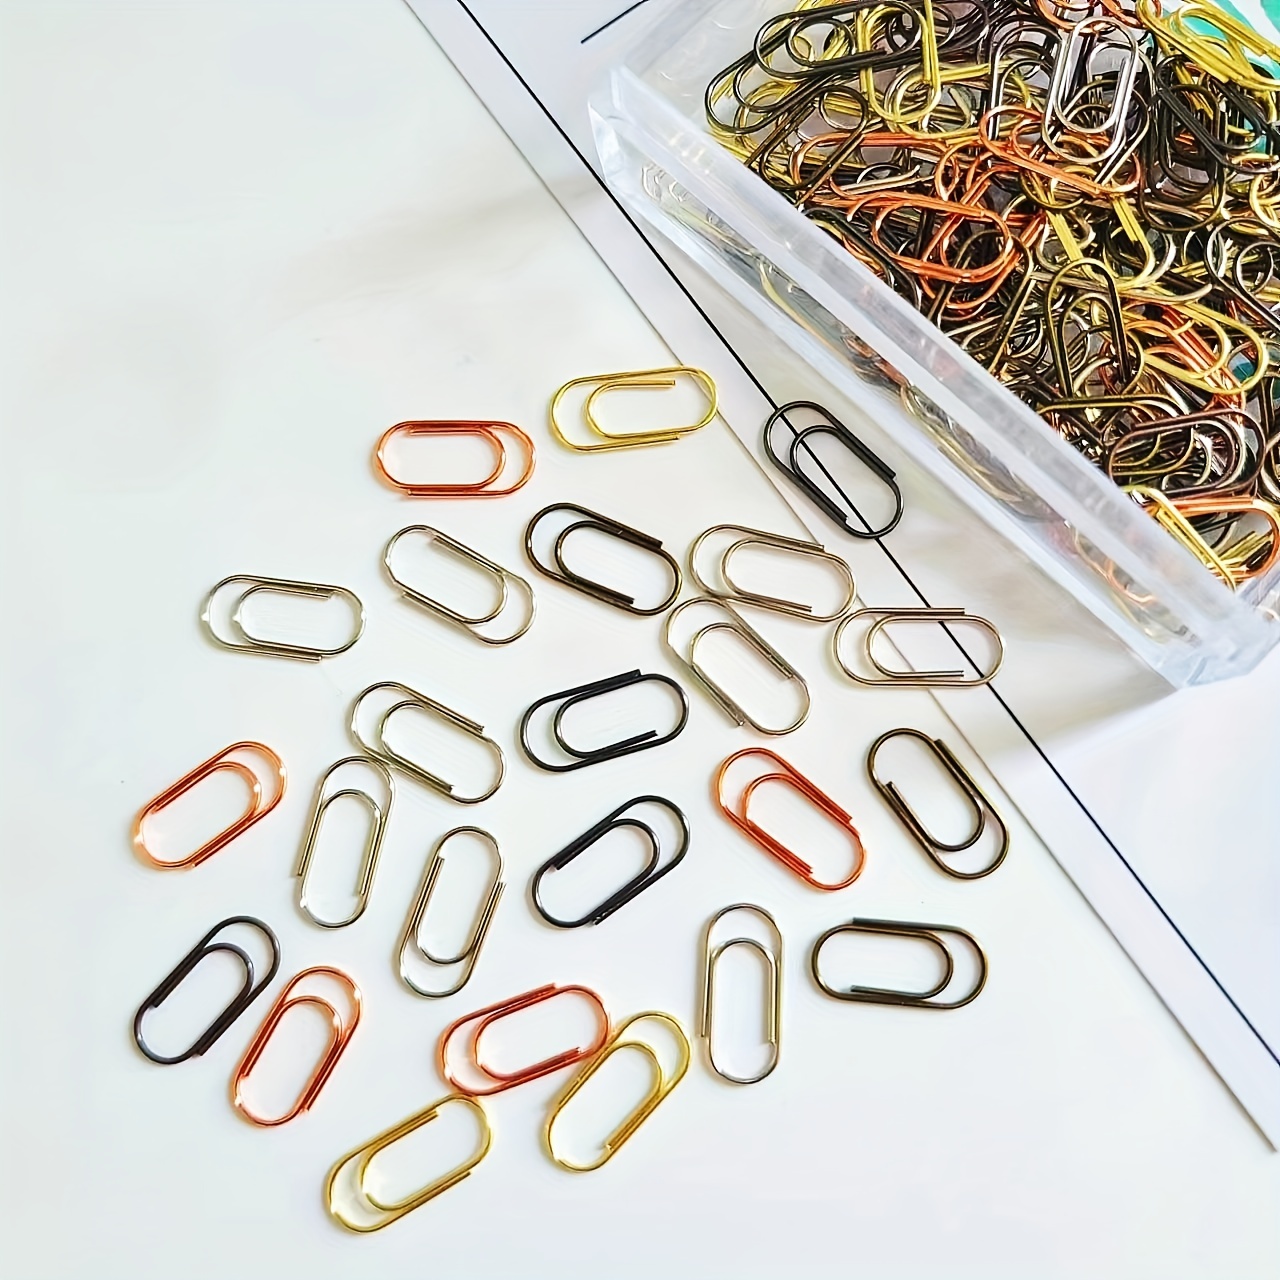 300pcs Colorful Reusable Paper Clips - Perfect for School, Office, Folders,  Bookmarks & DIY Albums (Acrylic Box Packaging)